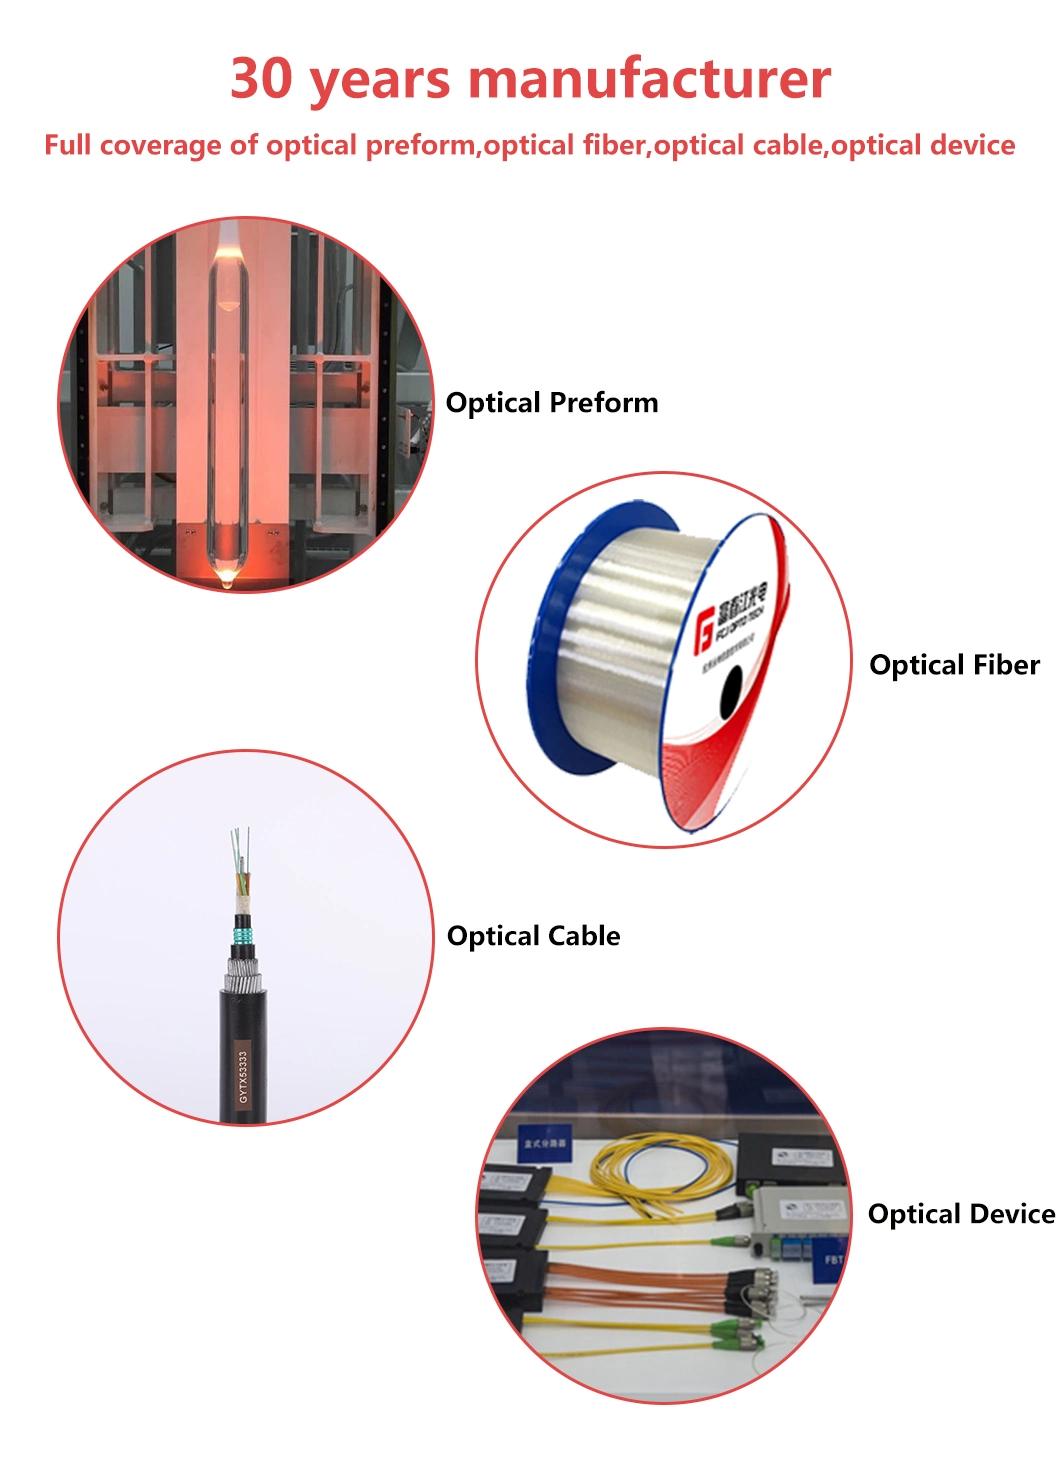 Fully Compatible with G. 652 Single-Mode Fiber Manufacturer Coloring Glass